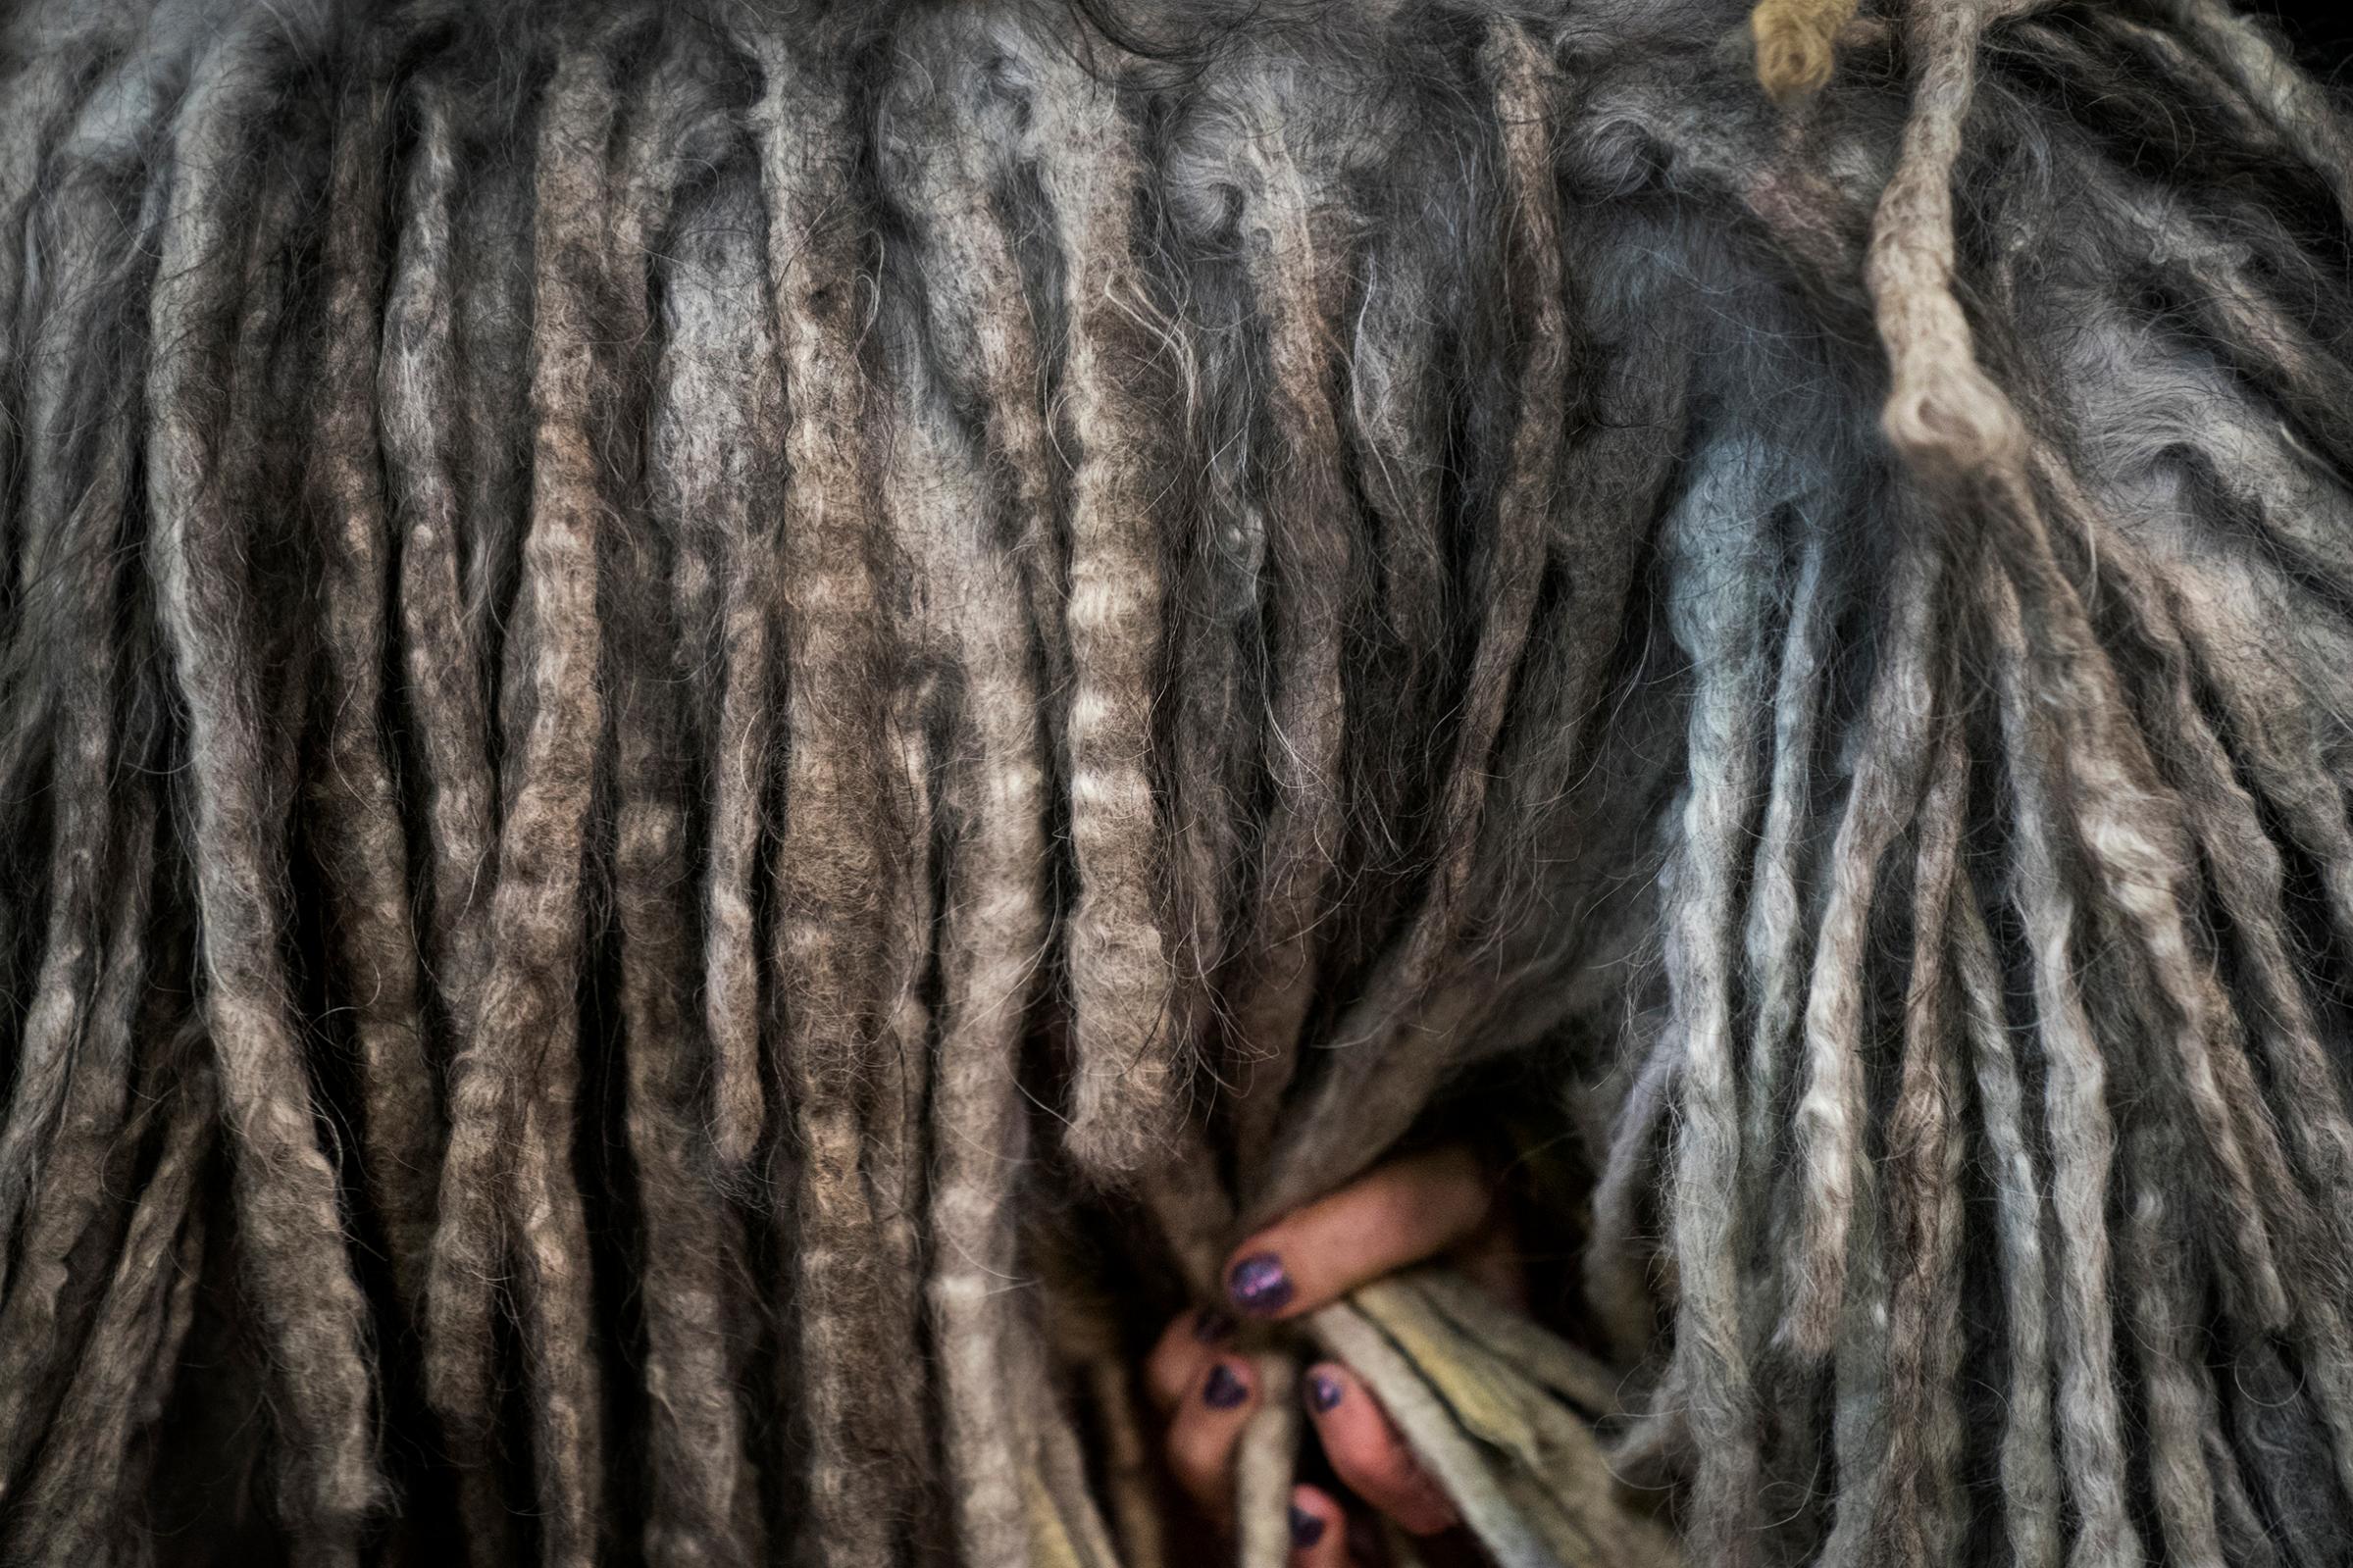 A Bergamasco Sheep Dog is groomed backstage at the 142nd Westminster Kennel Club Dog Show at The Piers in New York on Feb. 12, 2018.